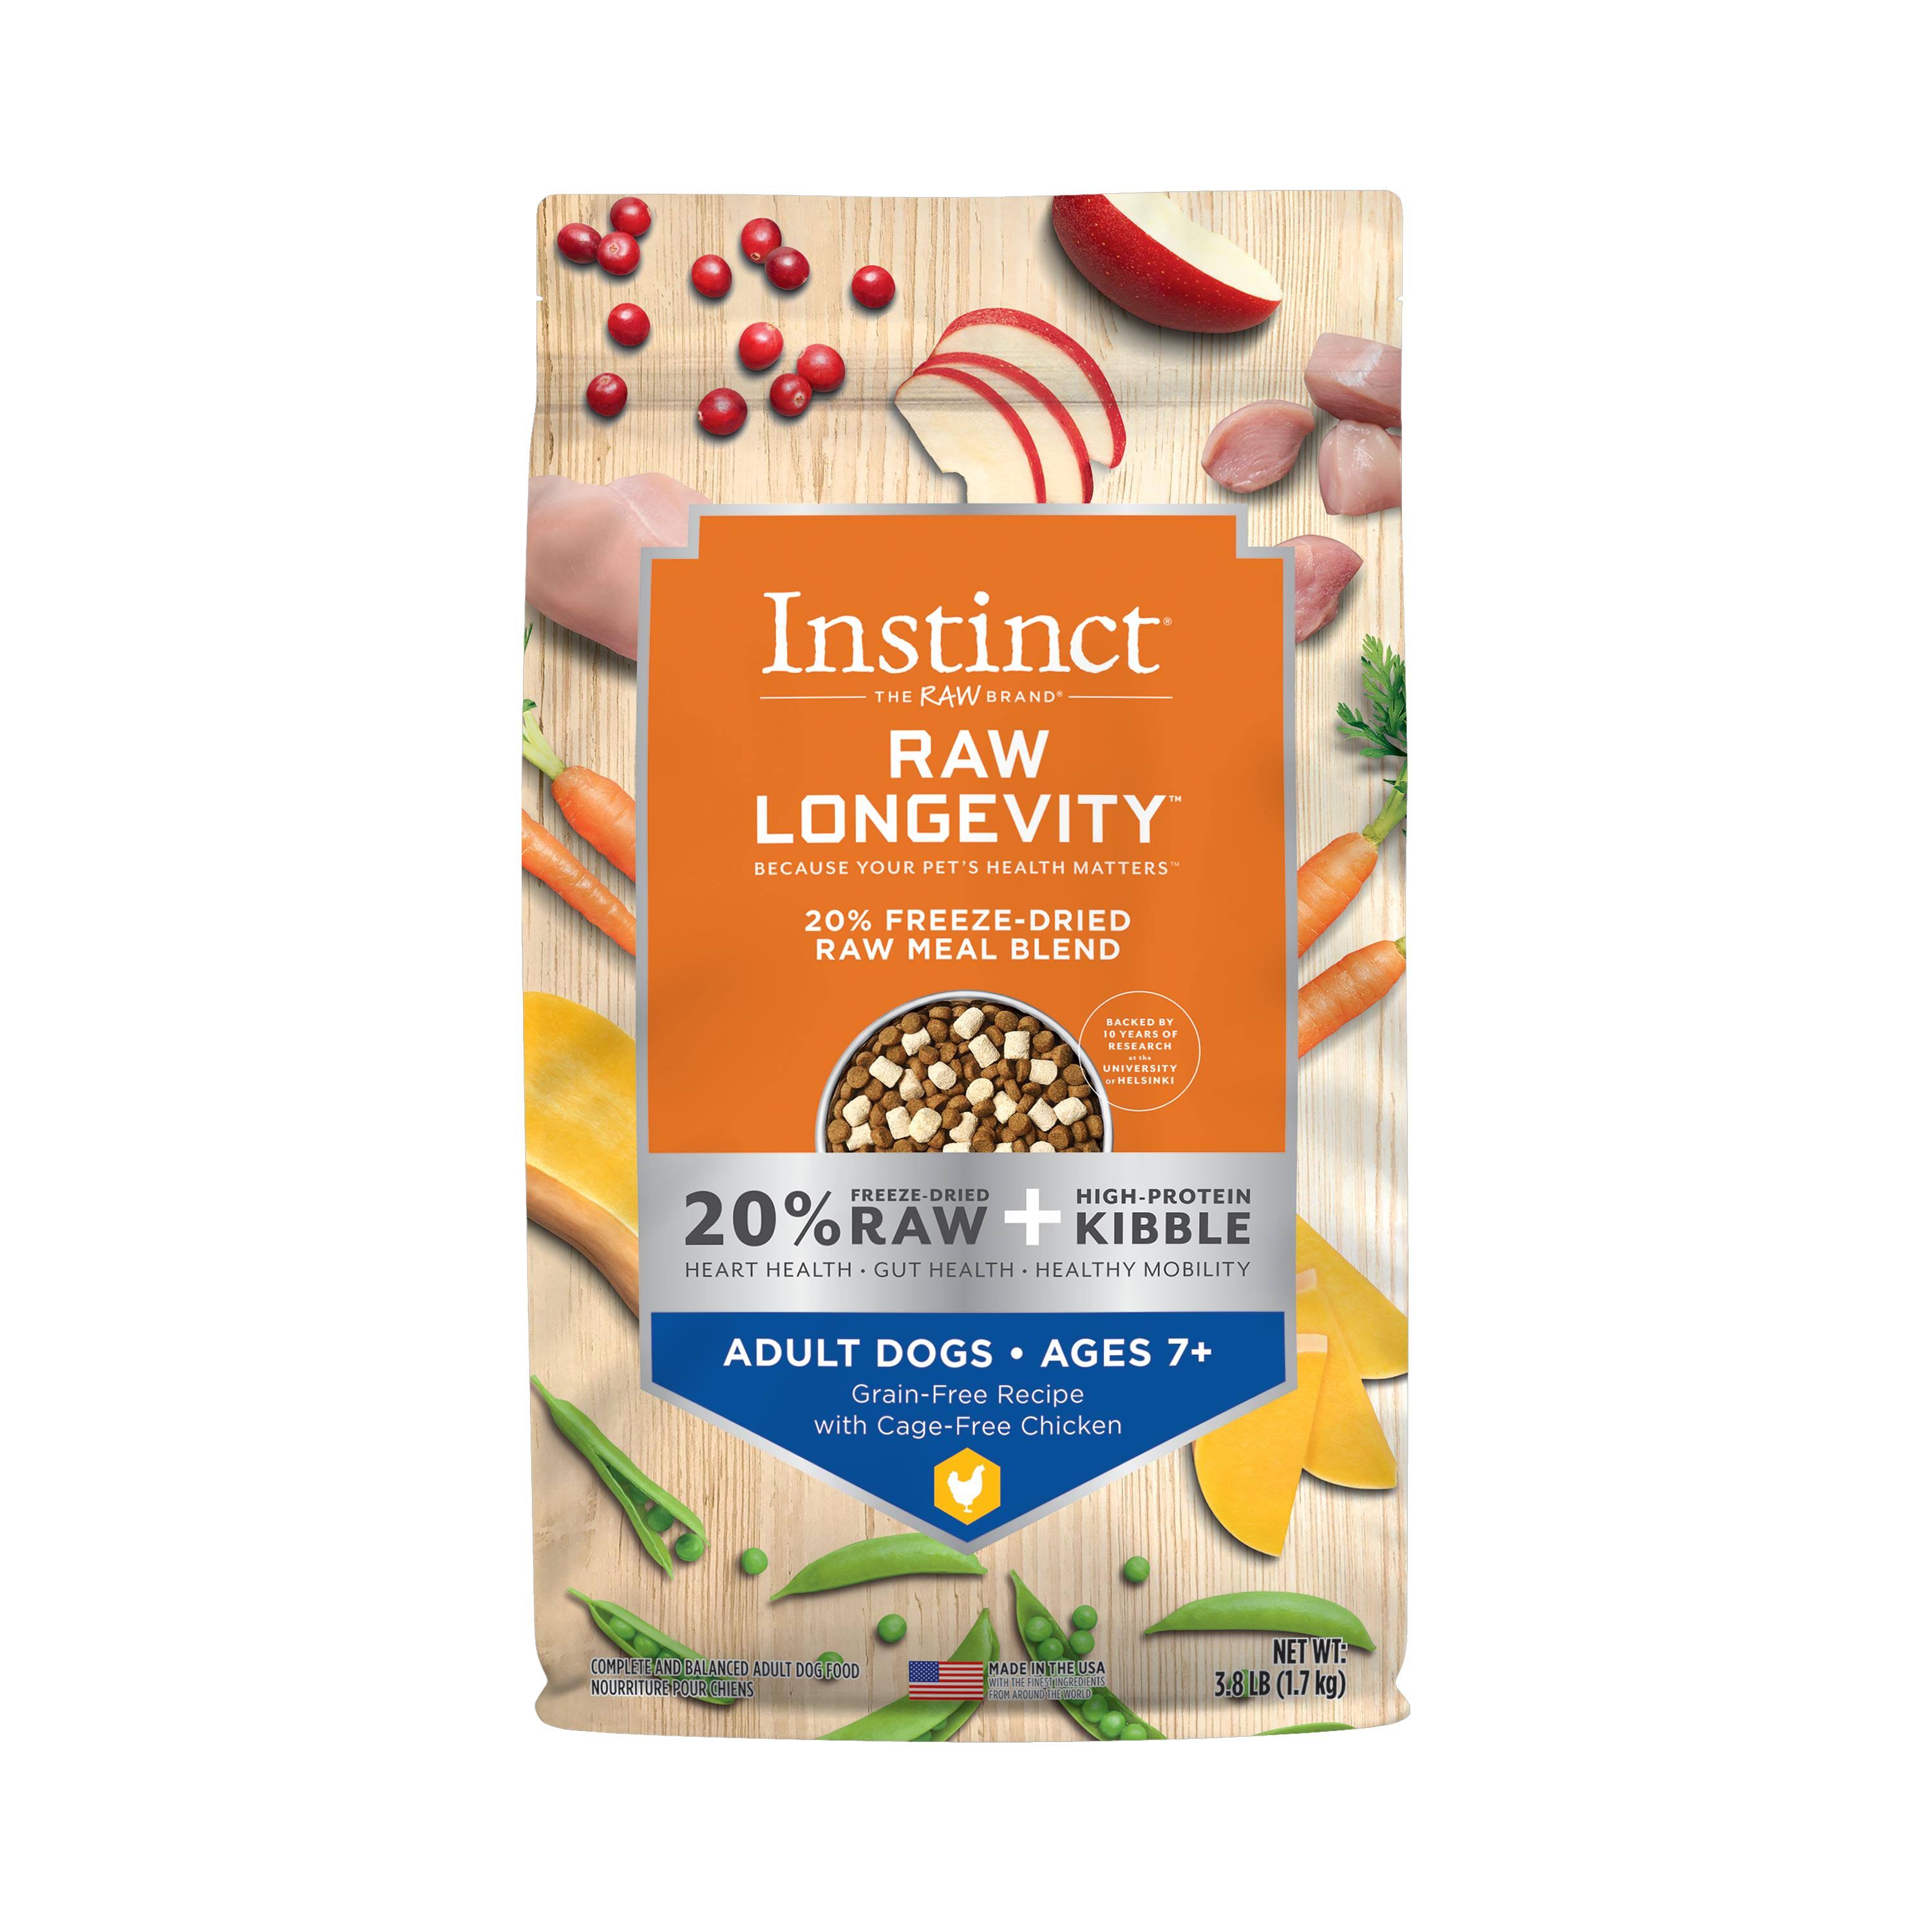 Instinct Raw Longevity 20% Freeze-Dried Raw Meal Blend Grain-Free Recipe with Cage-Free Chicken for Adult Dogs Ages 7+ 1.7 Kg